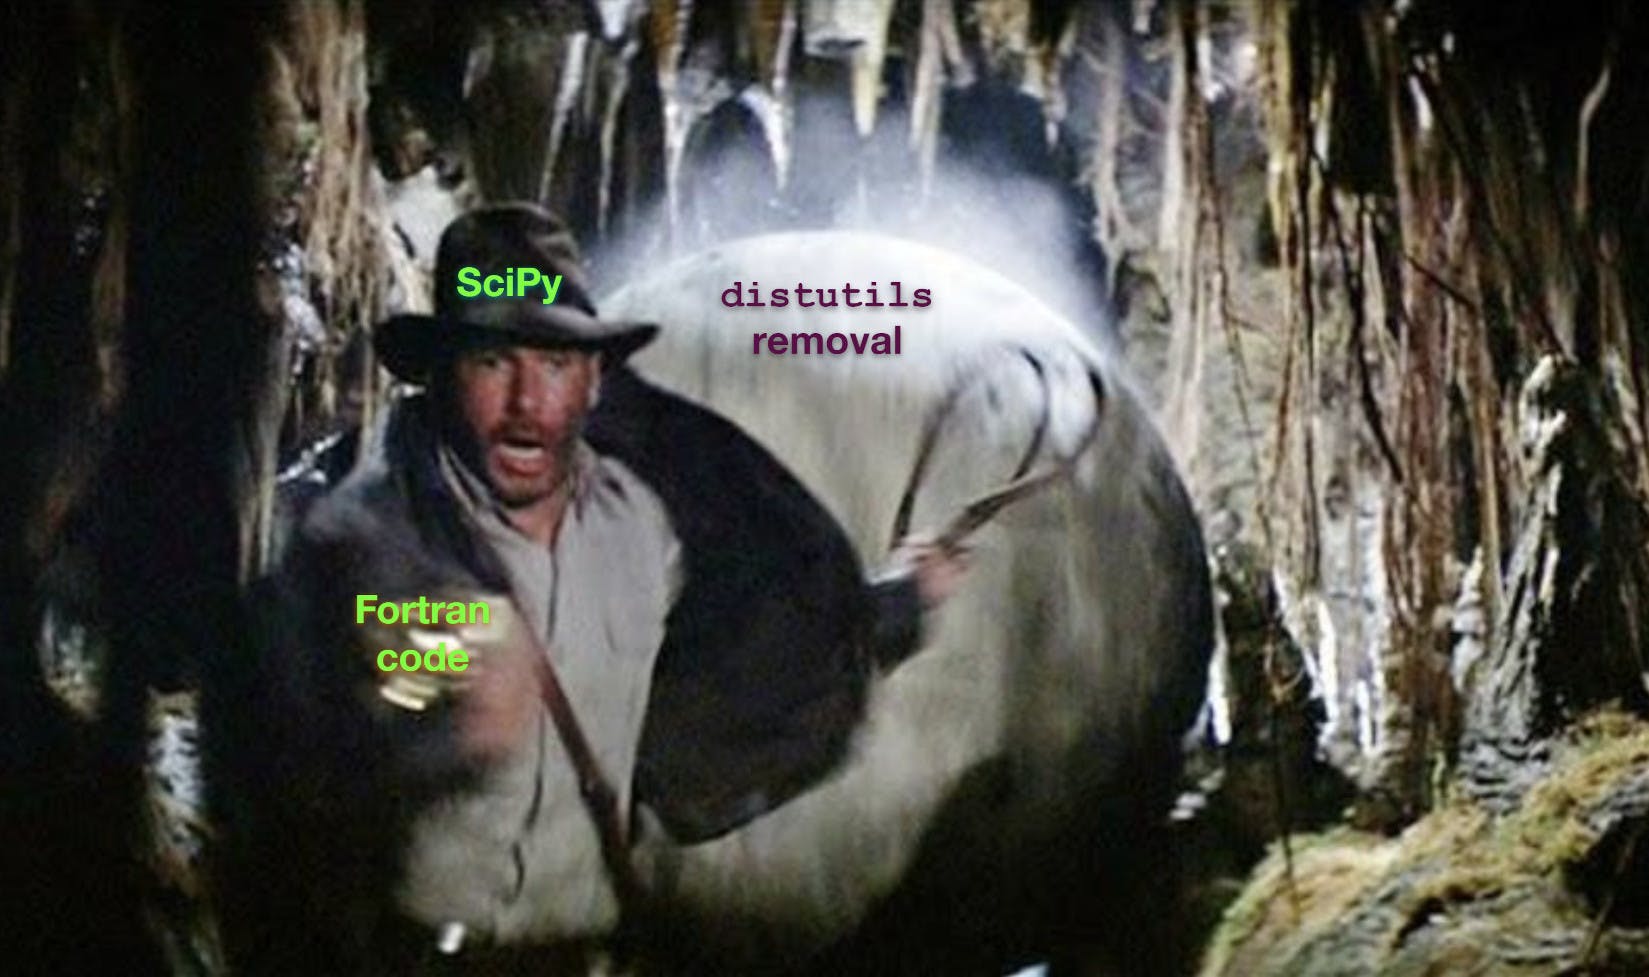 An object-labelling meme showing Indiana Jones (labelled "SciPy") running away in a tight space from a rolling boulder labelled "distutils removal", while carrying something labelled "Fortran code".
